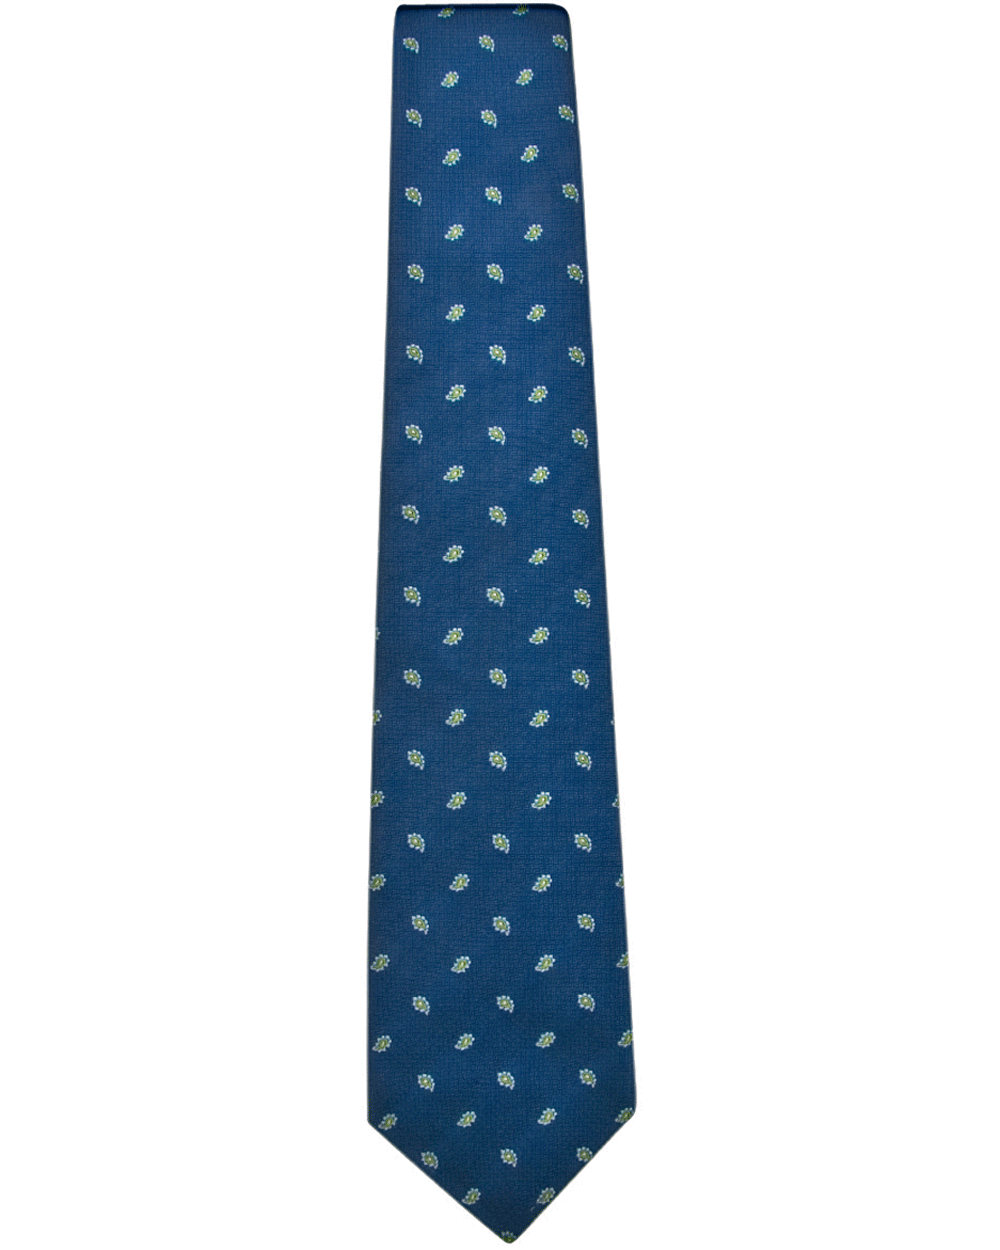 Blue and Lime Small Paisley Tie